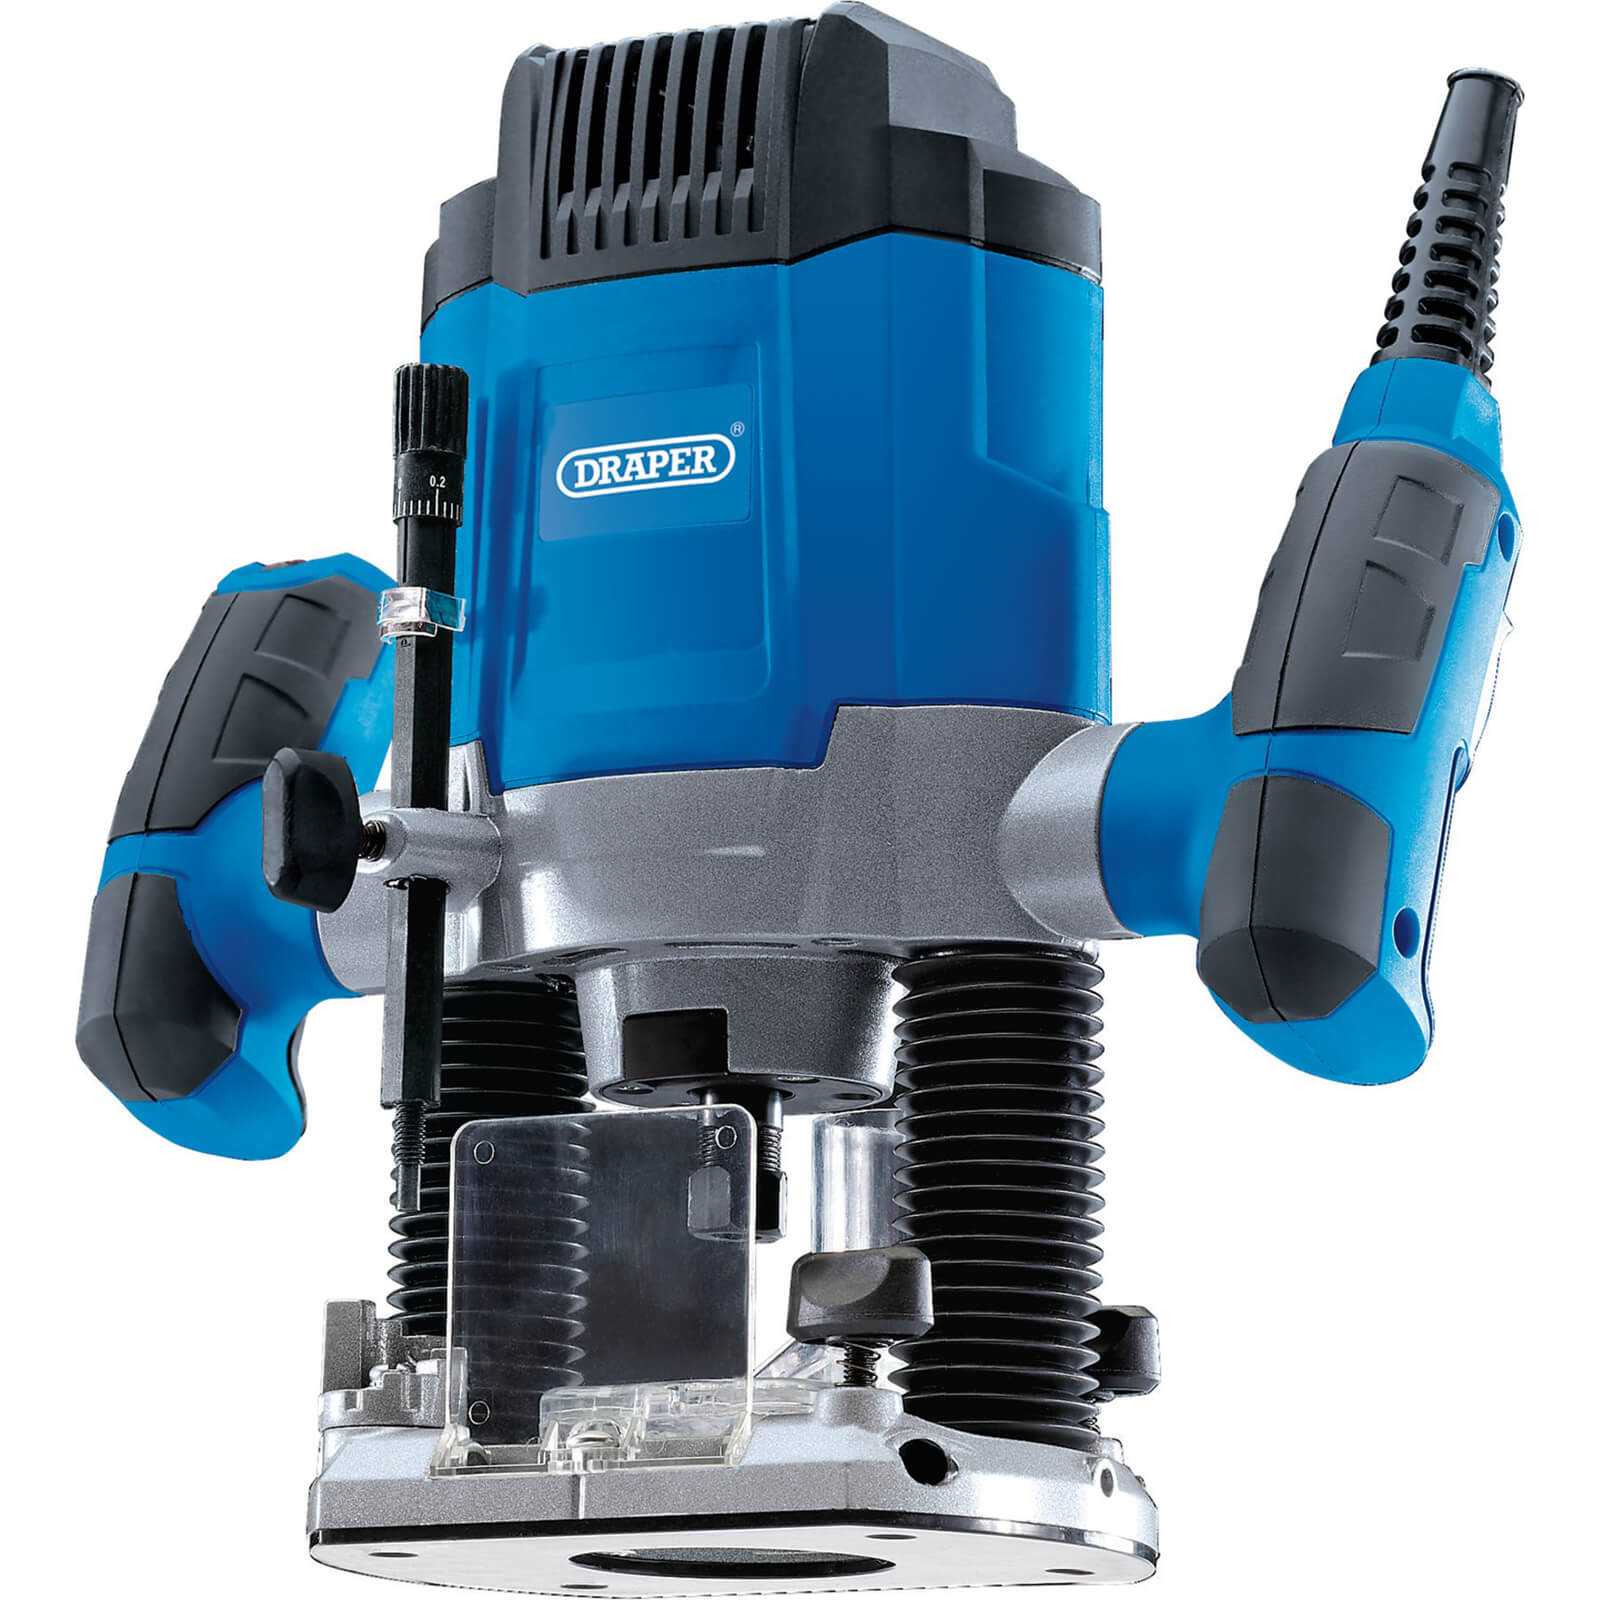 Image of Draper R8/1200D Variable Speed 1/4" Plunge Router 240v